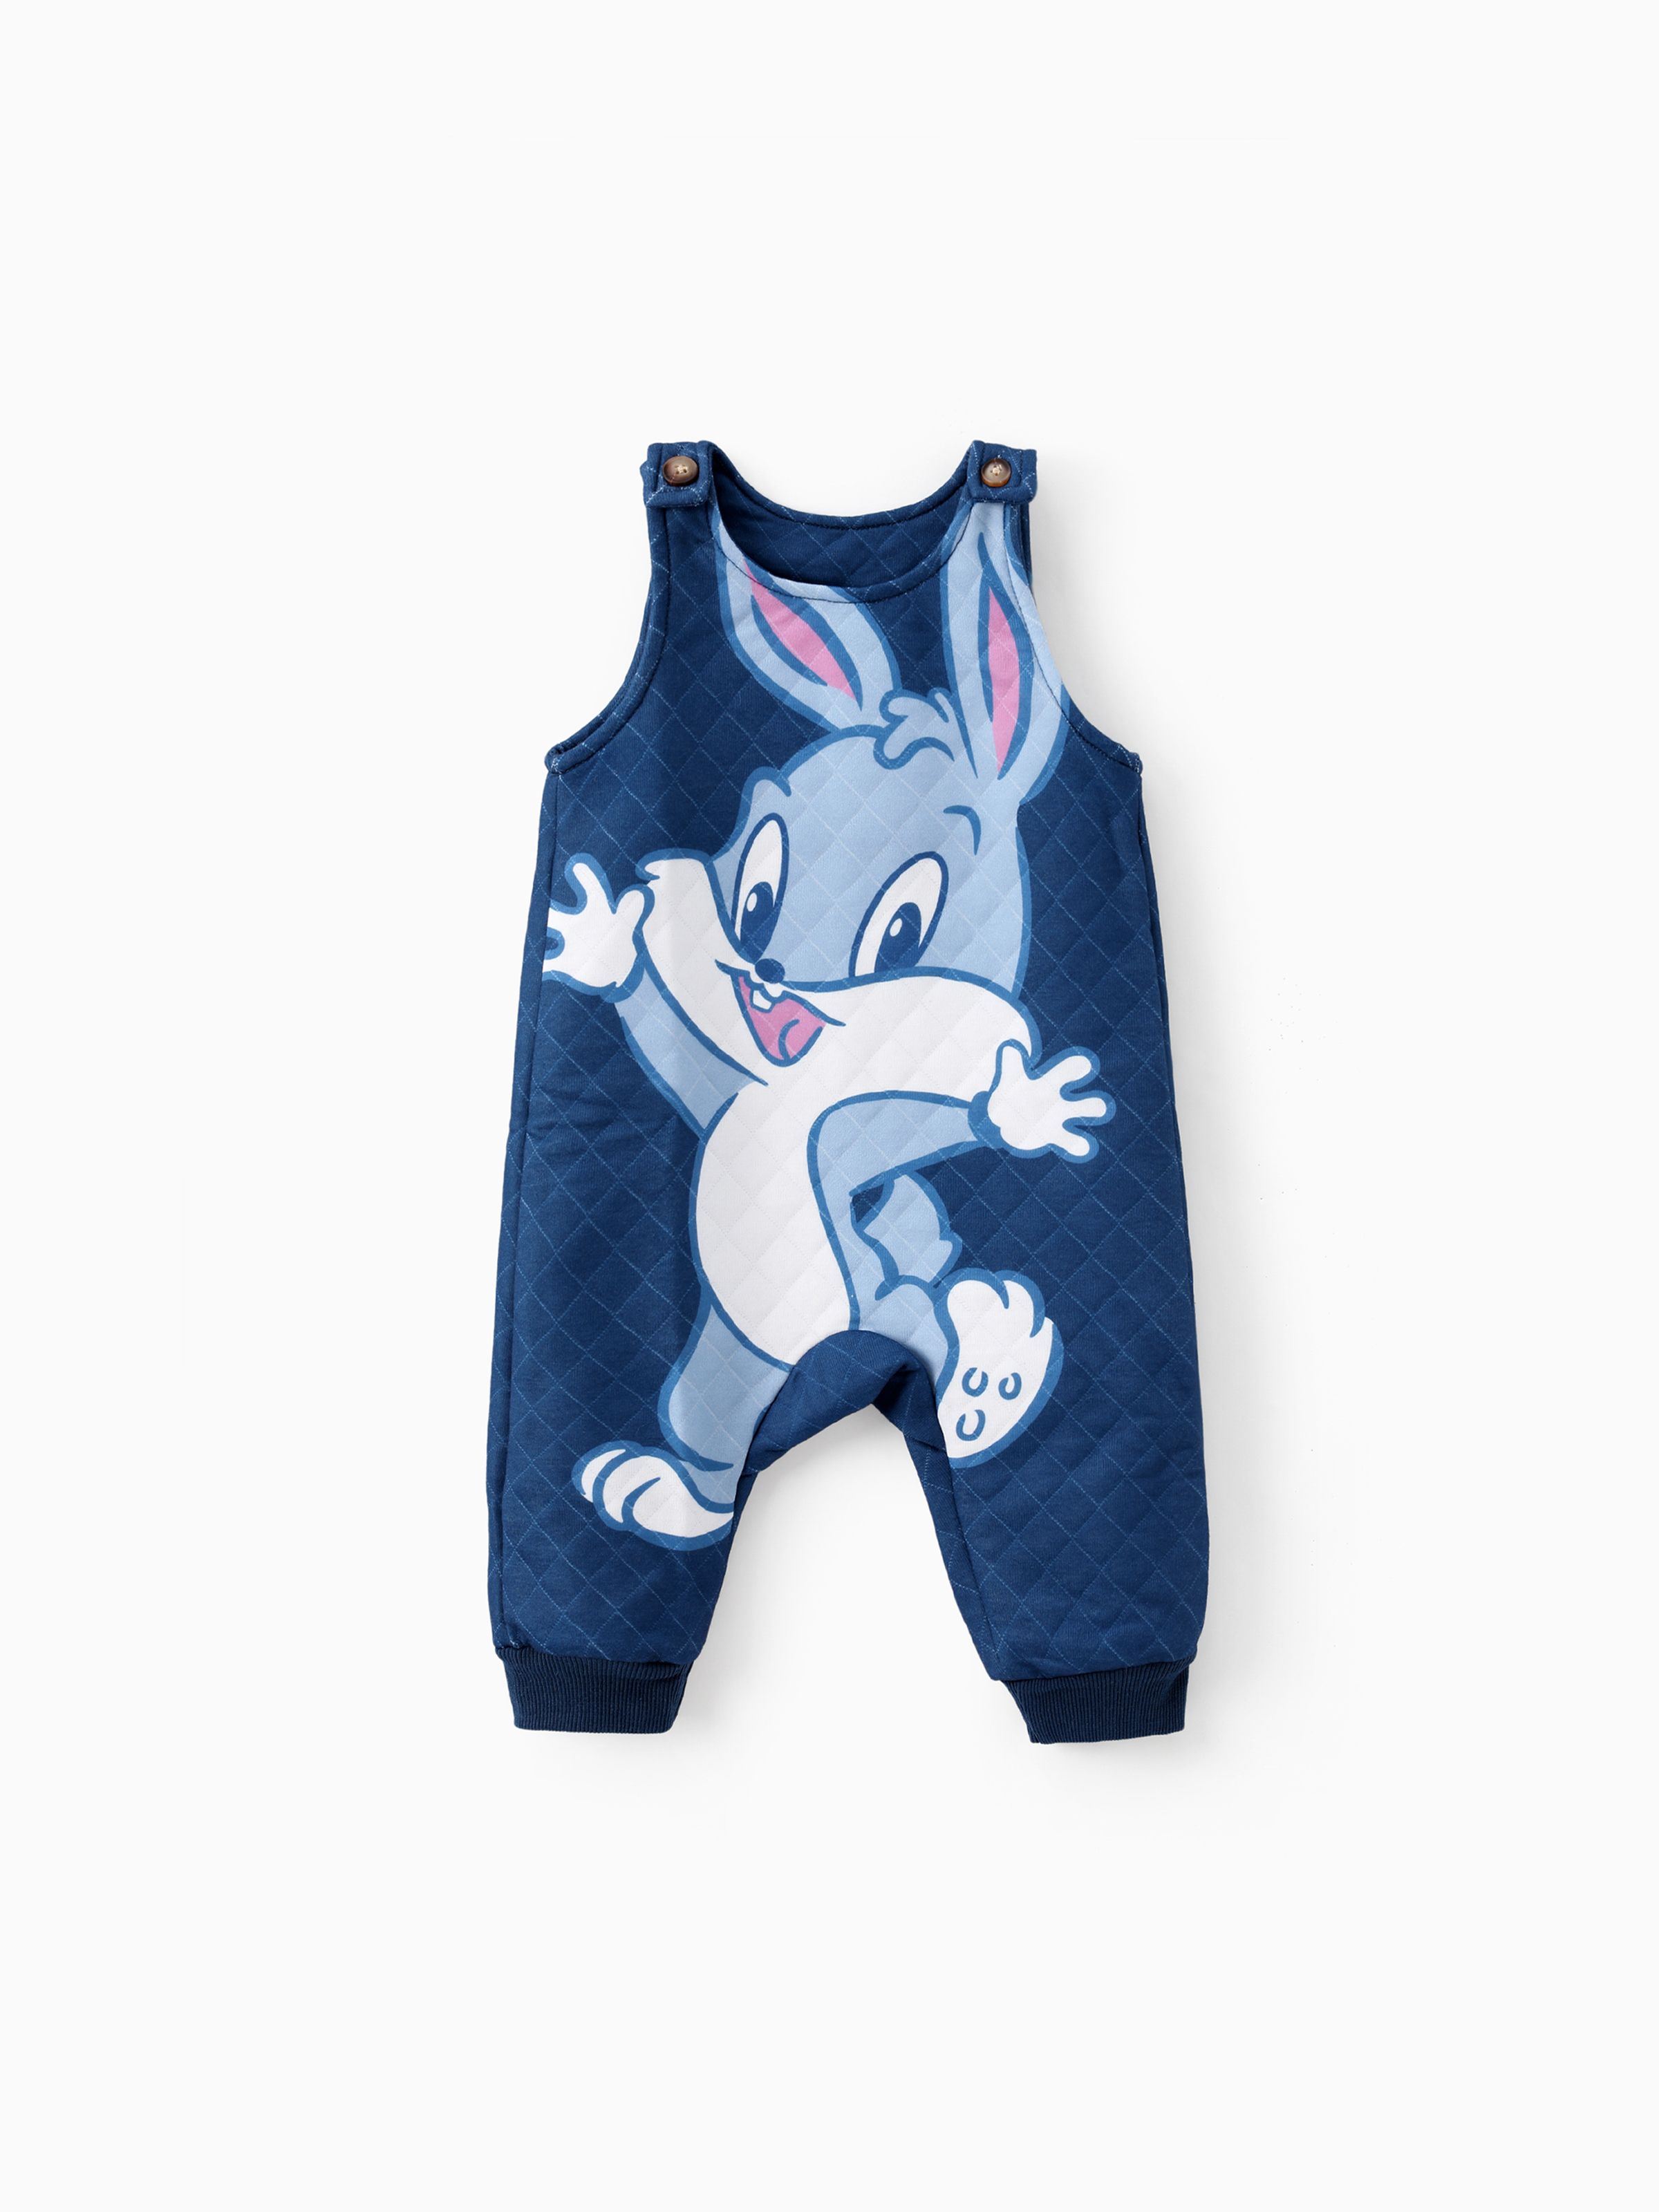 

Looney Tunes Baby Boy/Girl Character Graphic Print Top or Jumpsuit